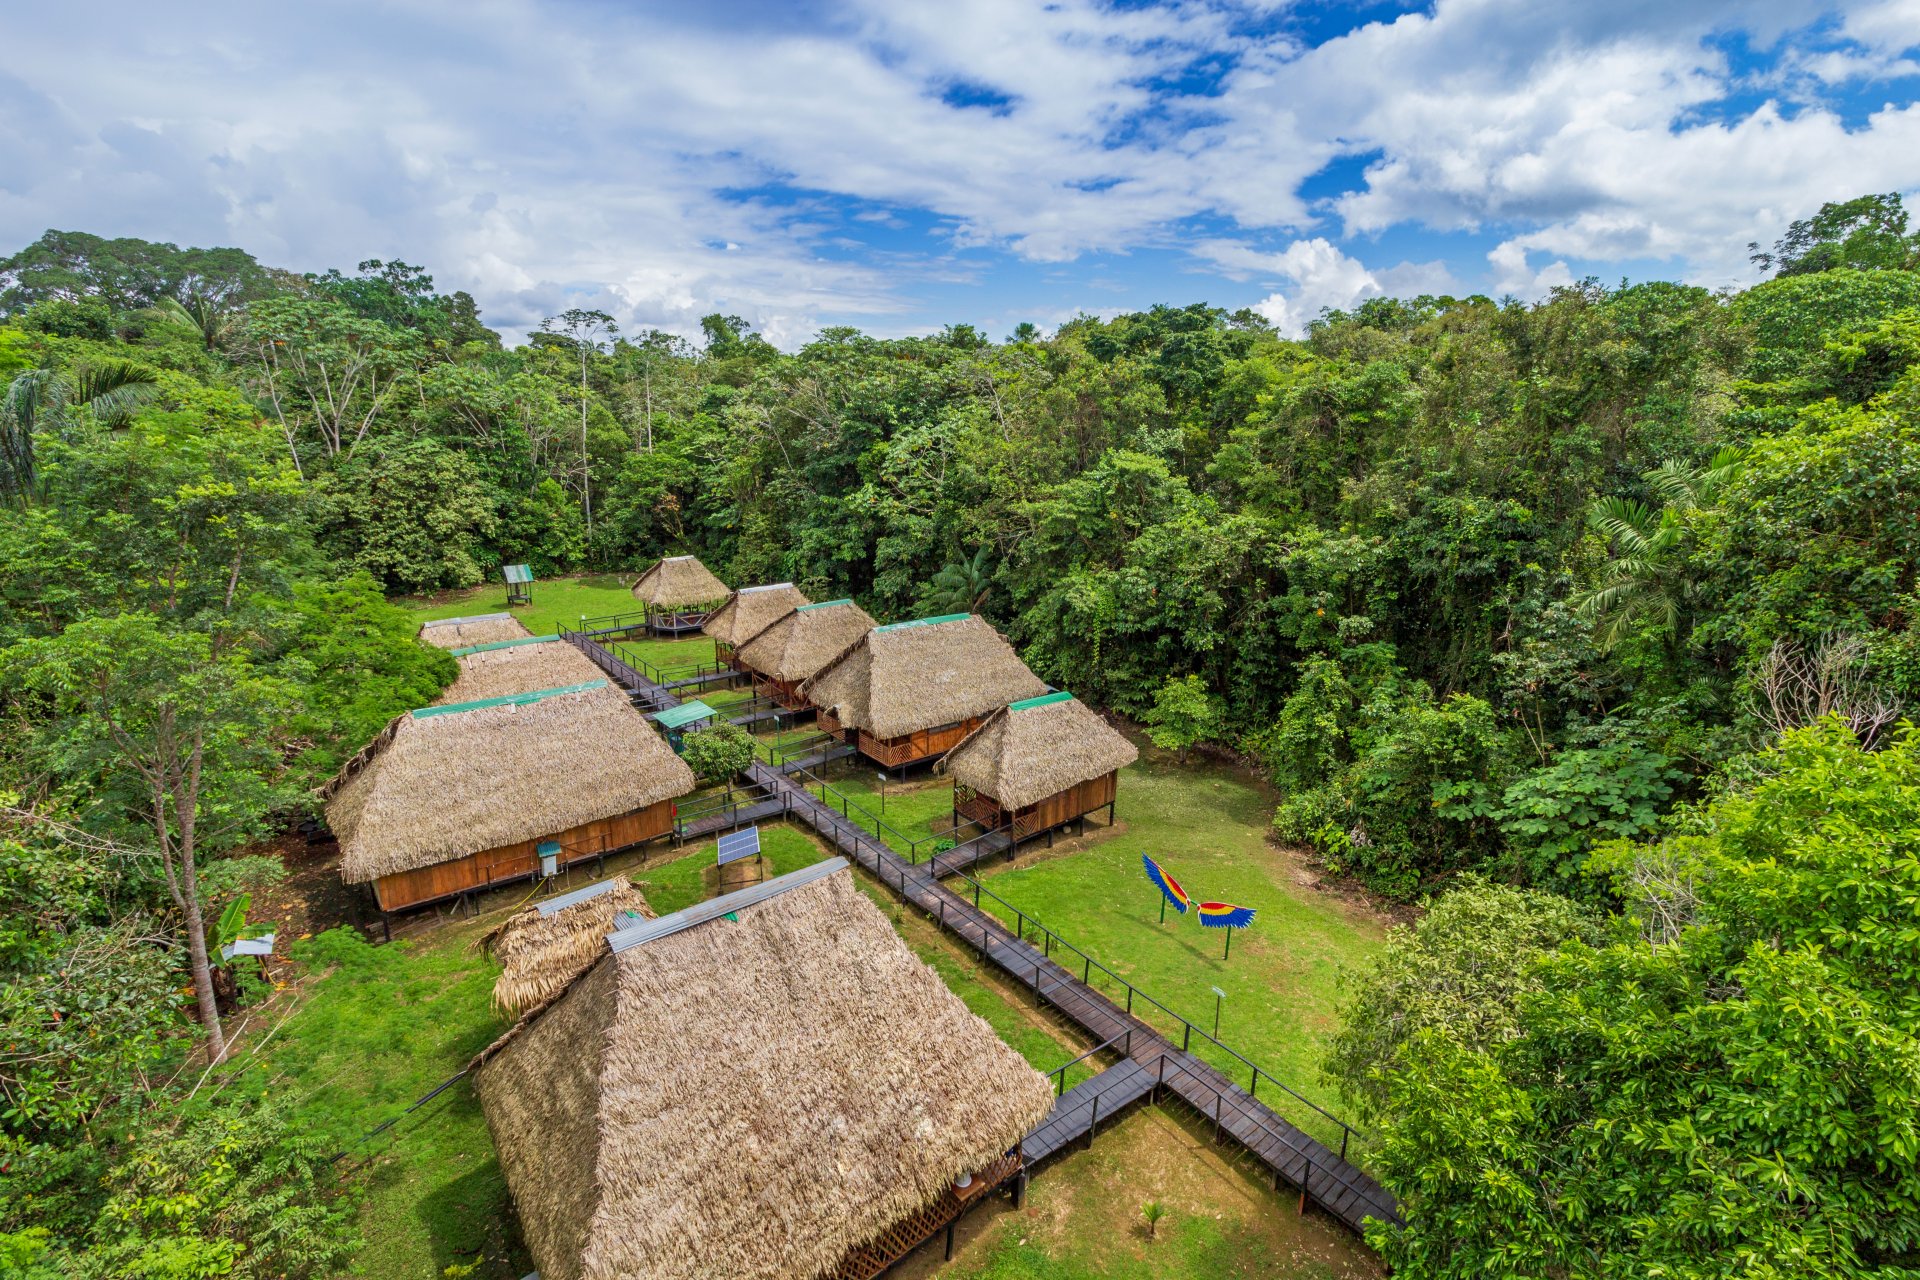 Why choose Green Forest Ecolodge as the best ?